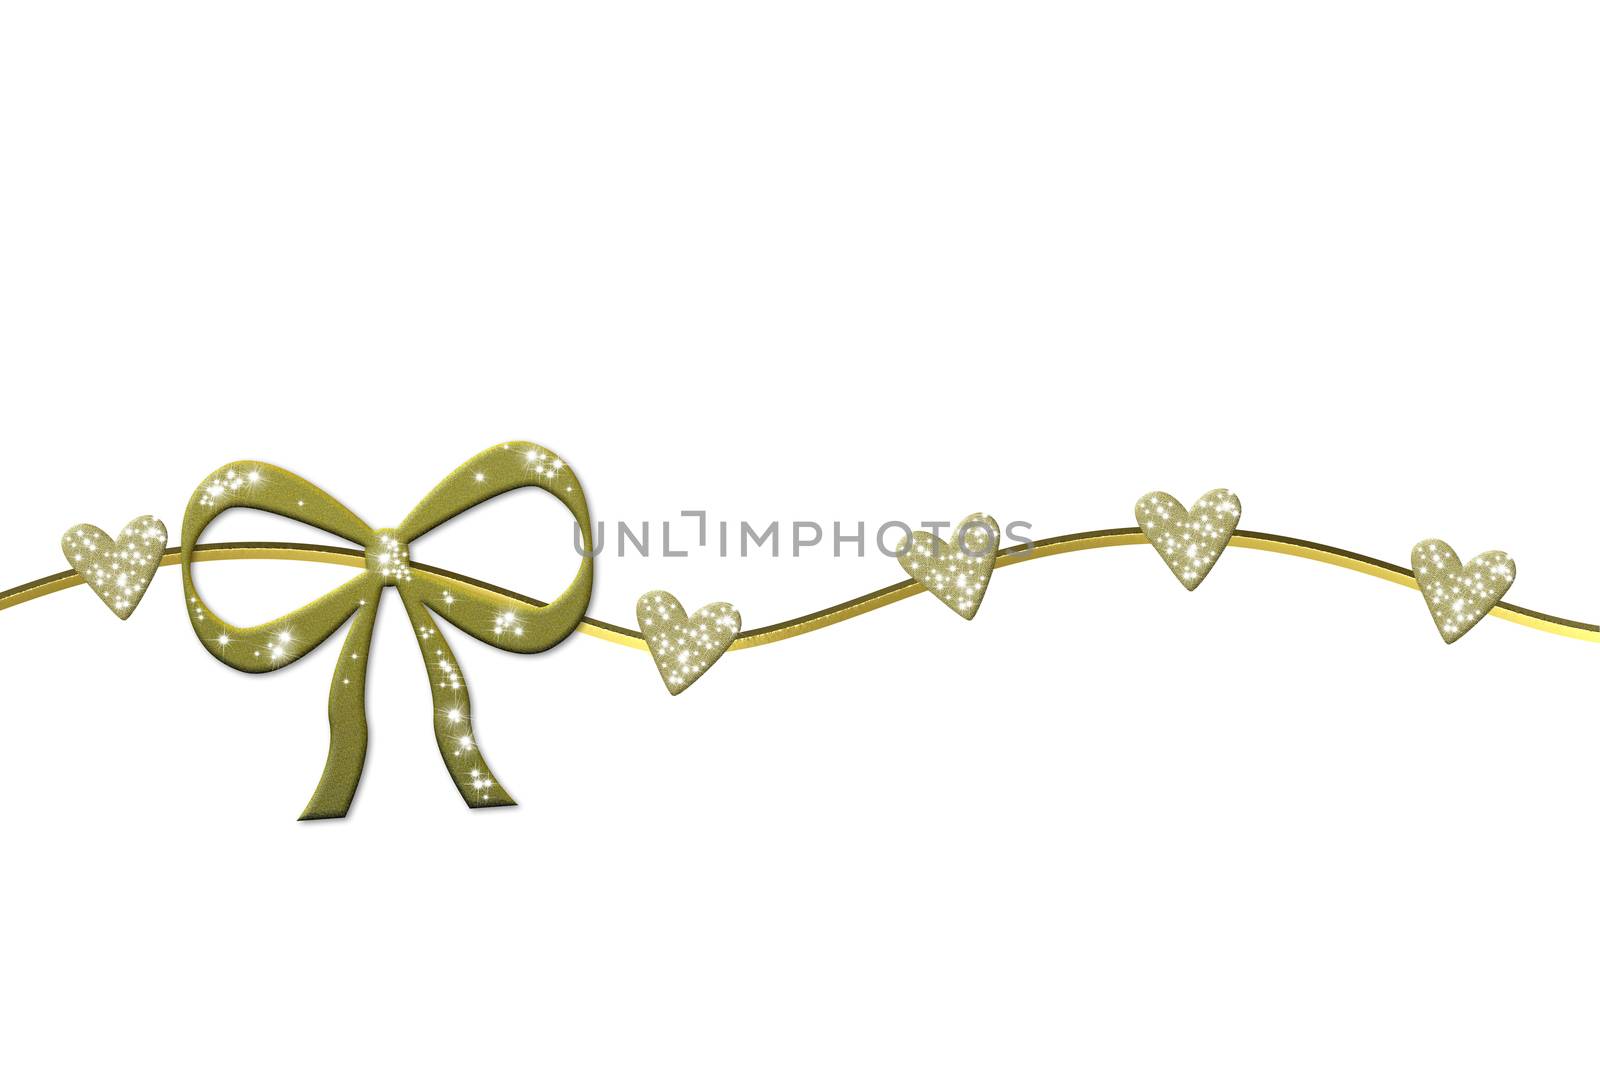 golden wreath with gift bow and glossy hearts  by Carche